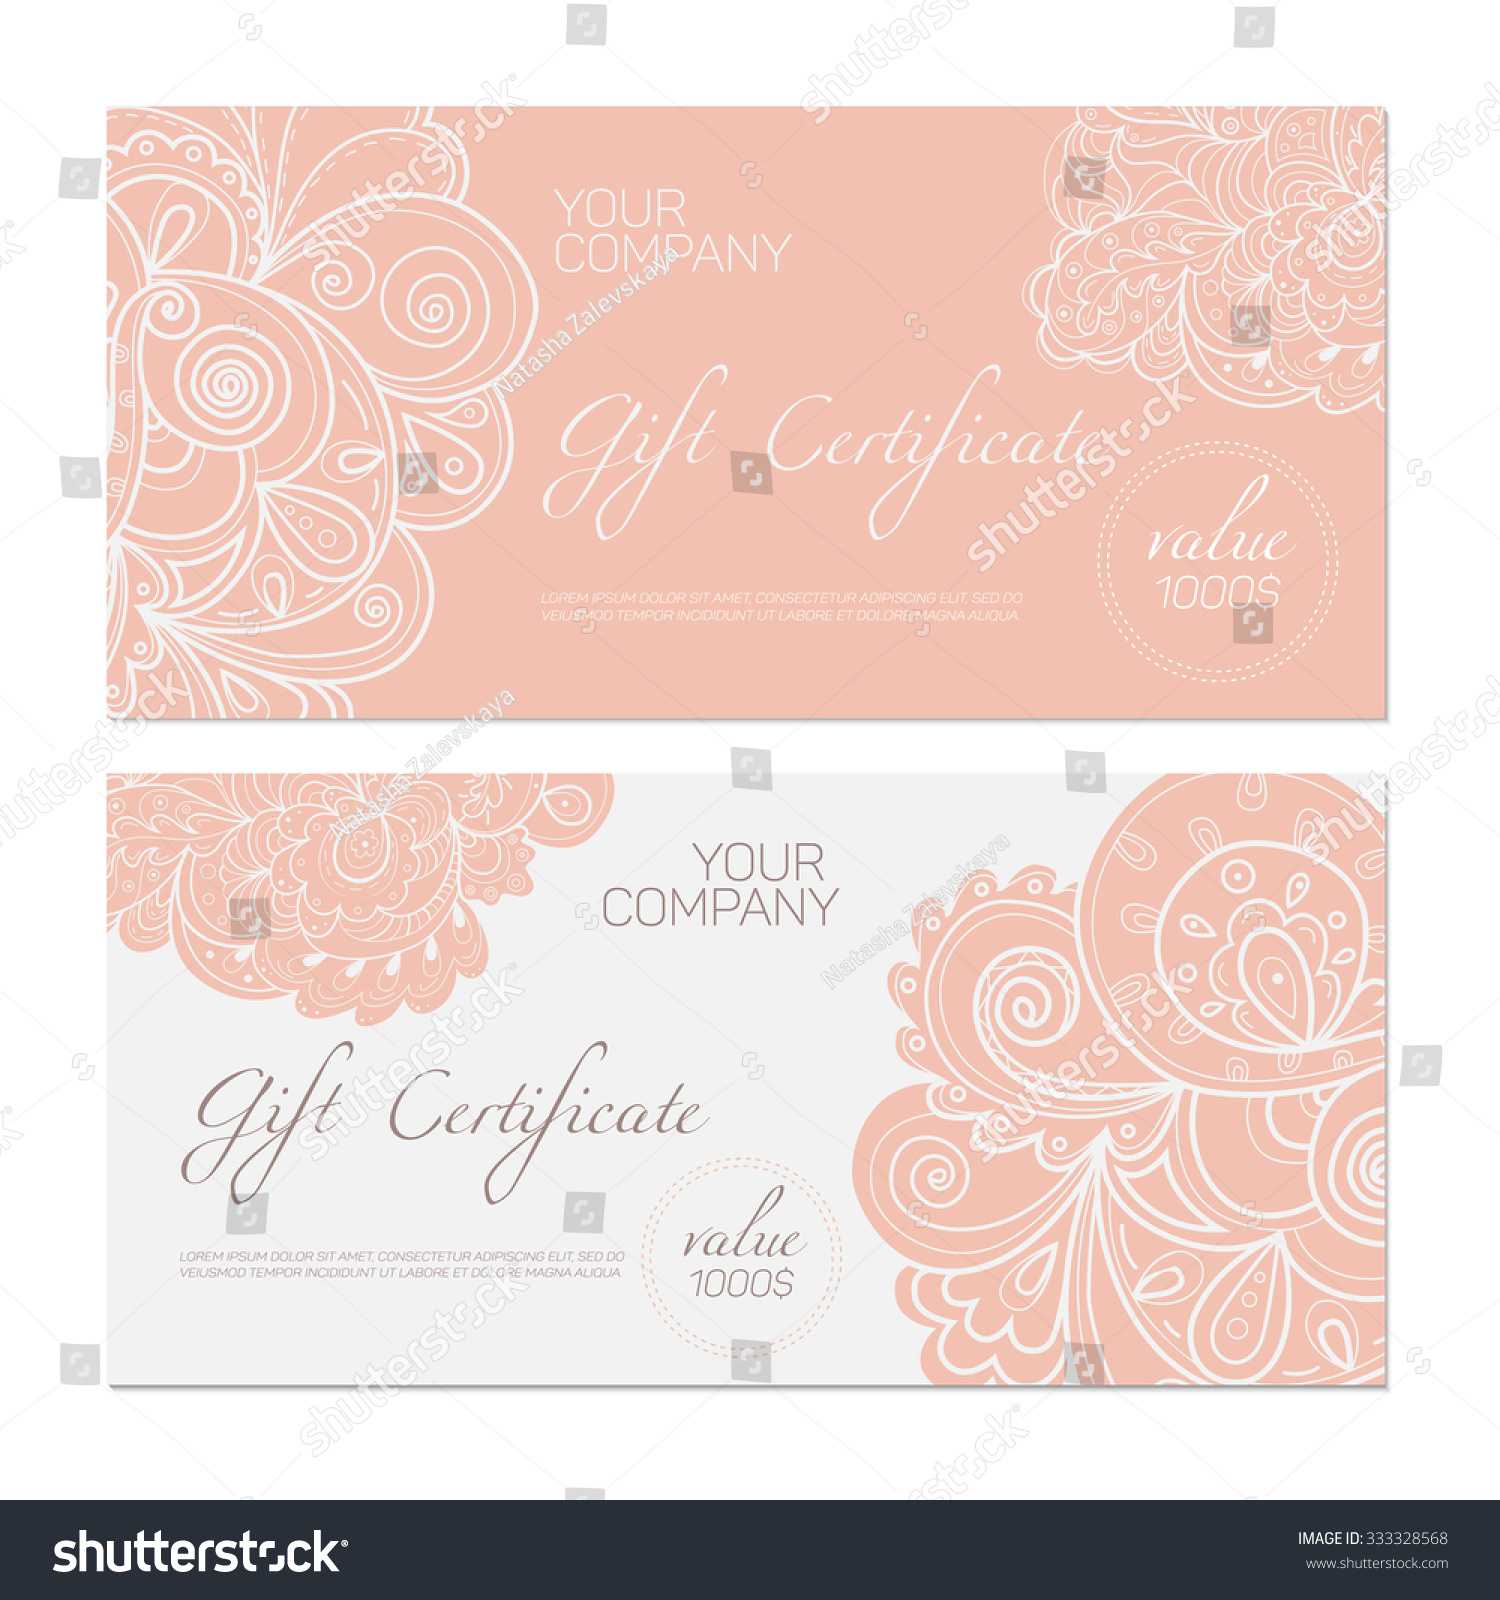 Elegant Gift Certificate Template Abstract Ornamental In Elegant Gift Certificate Template